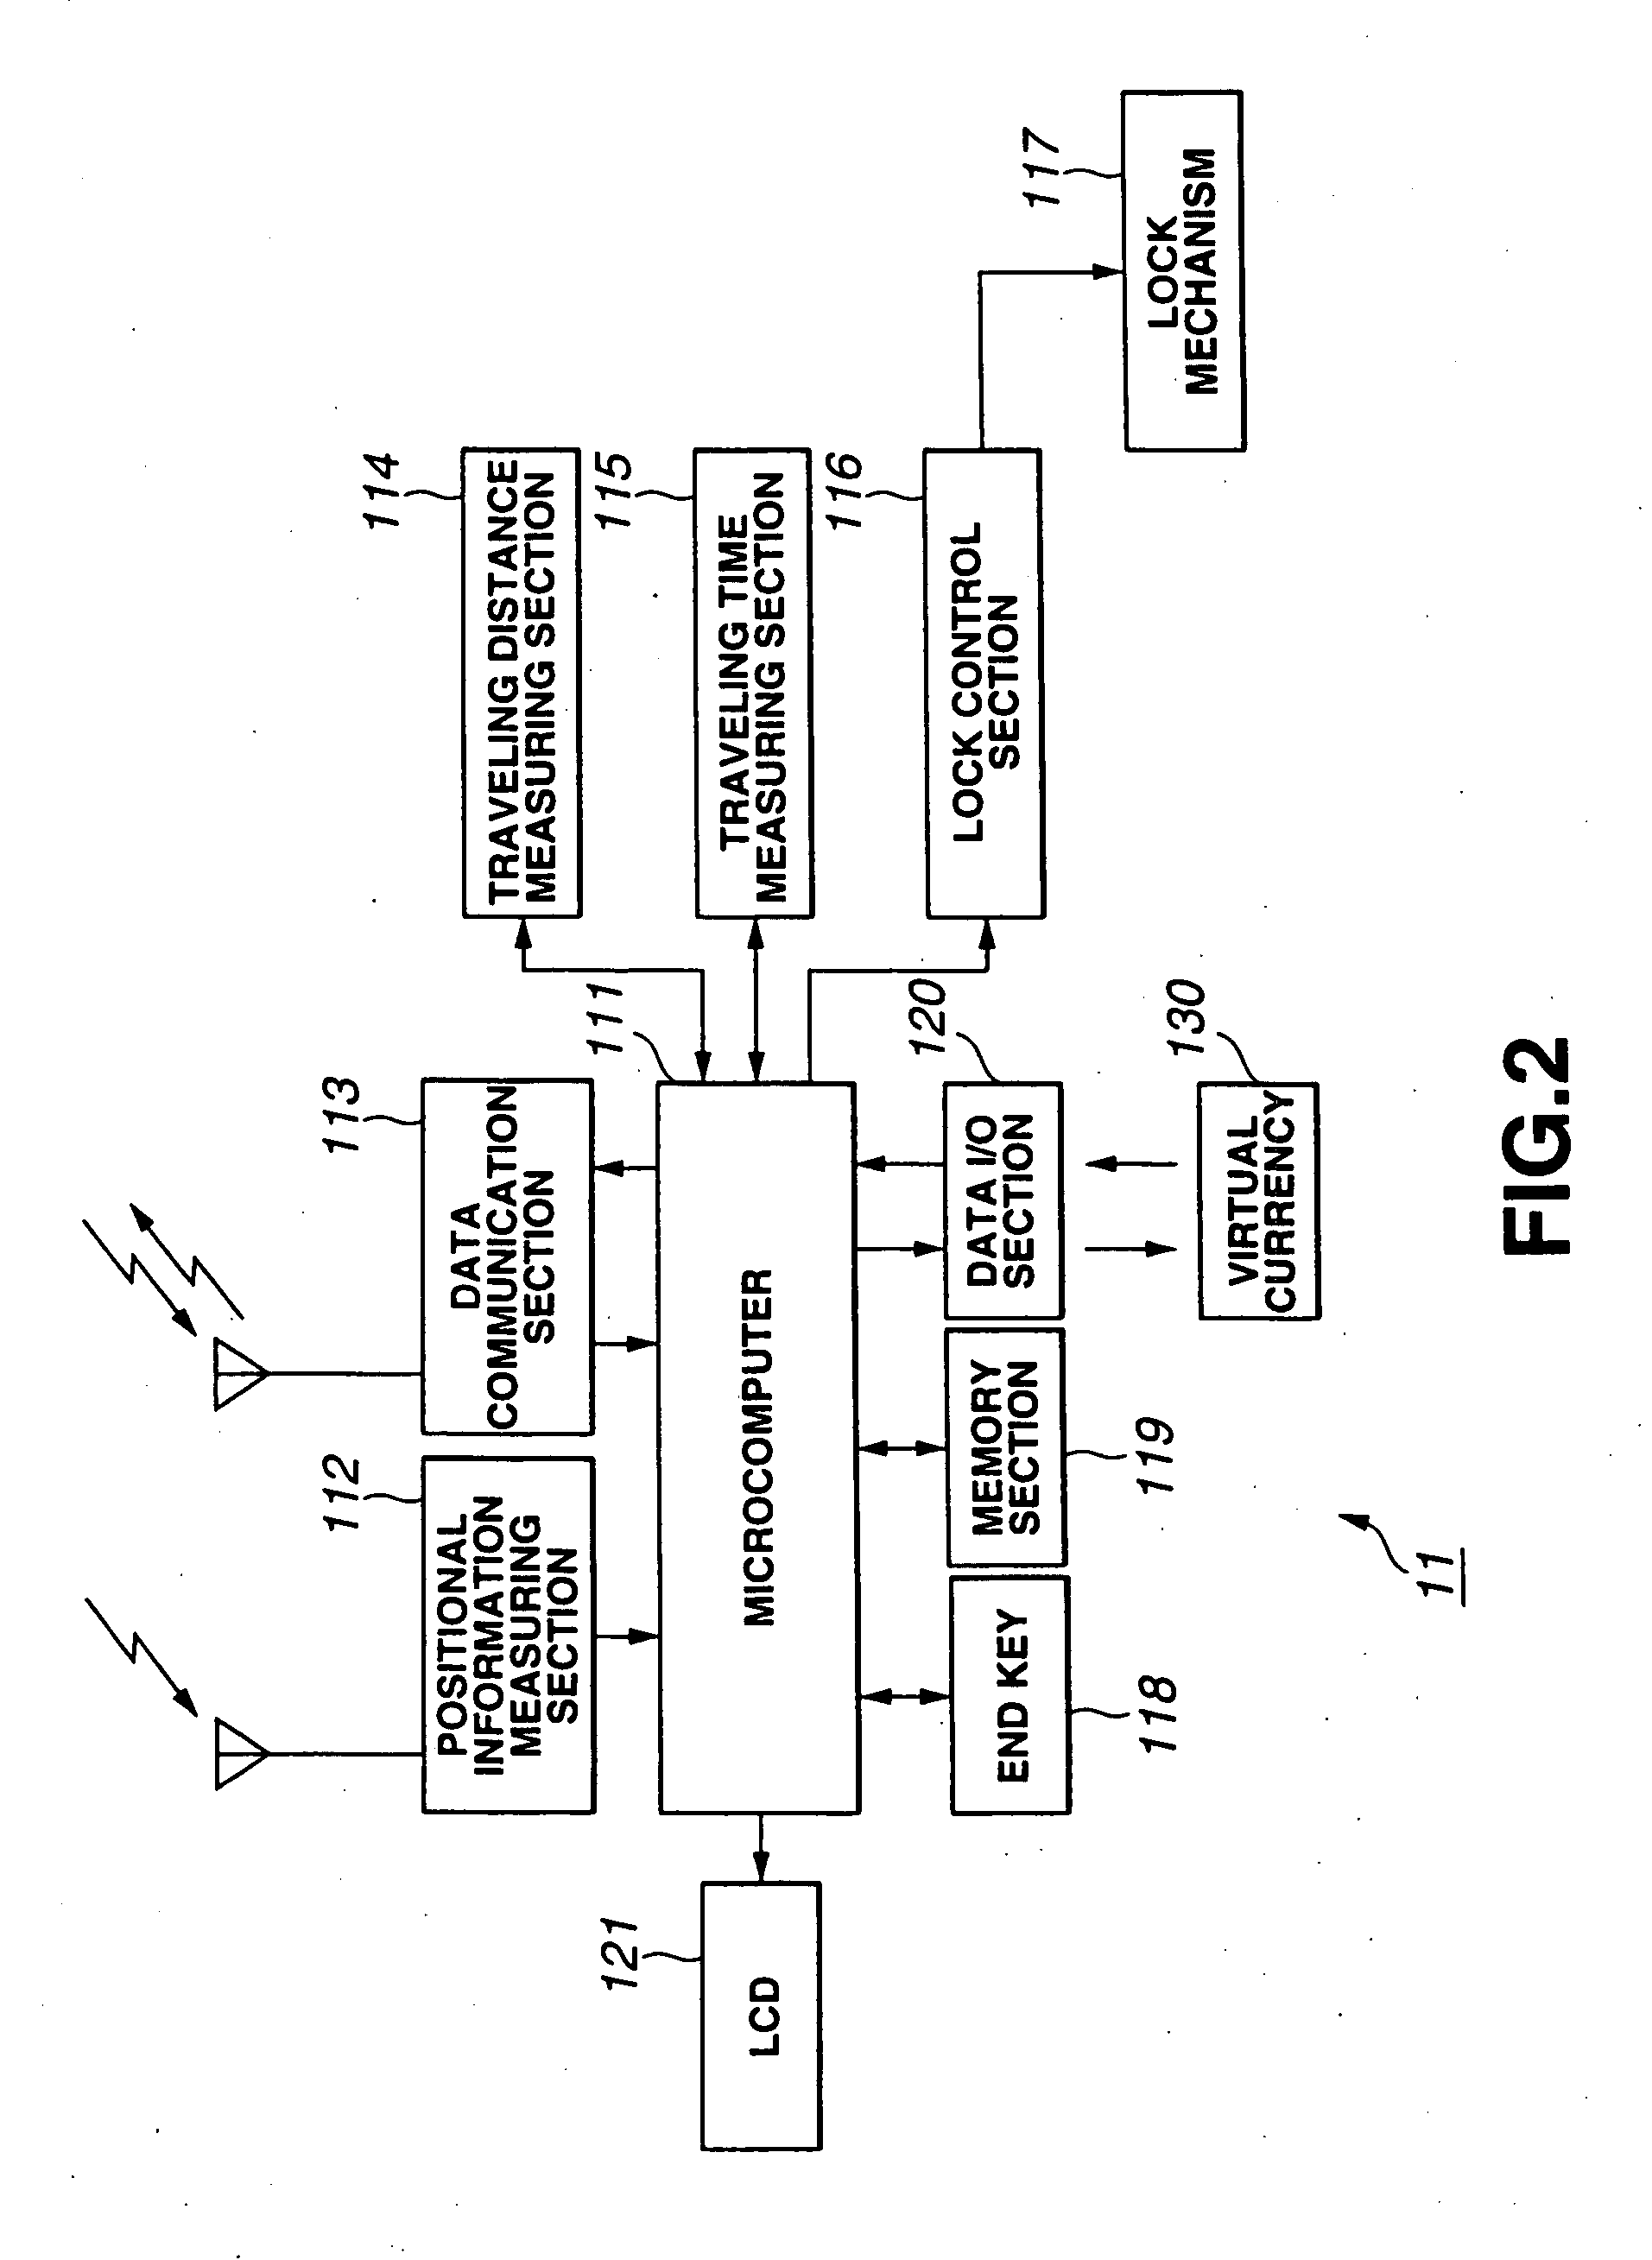 Rental system for movable body such as vehicle